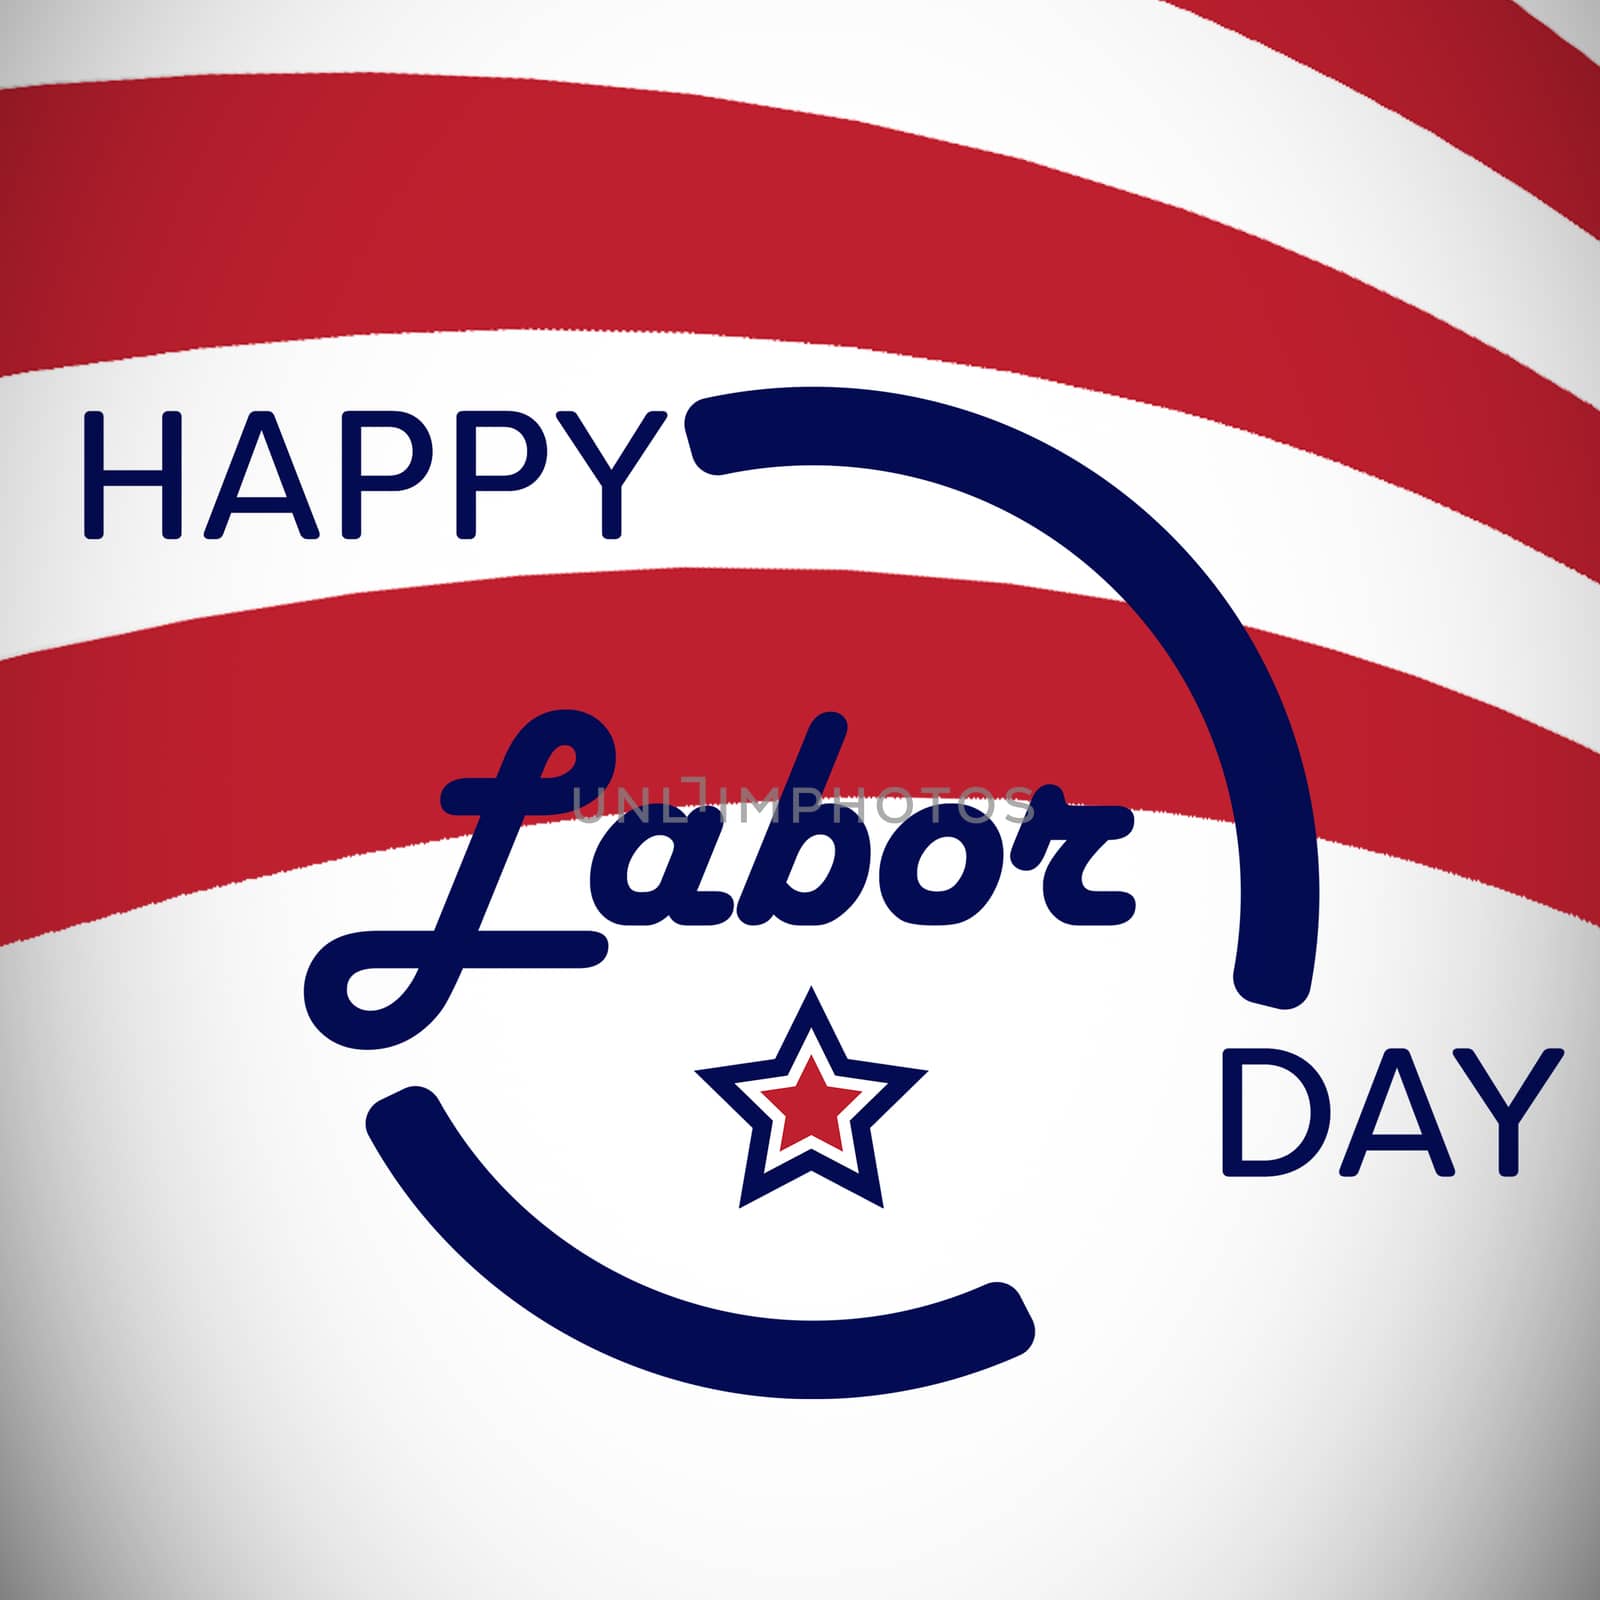 Digitally generated image of happy labor day banner by Wavebreakmedia